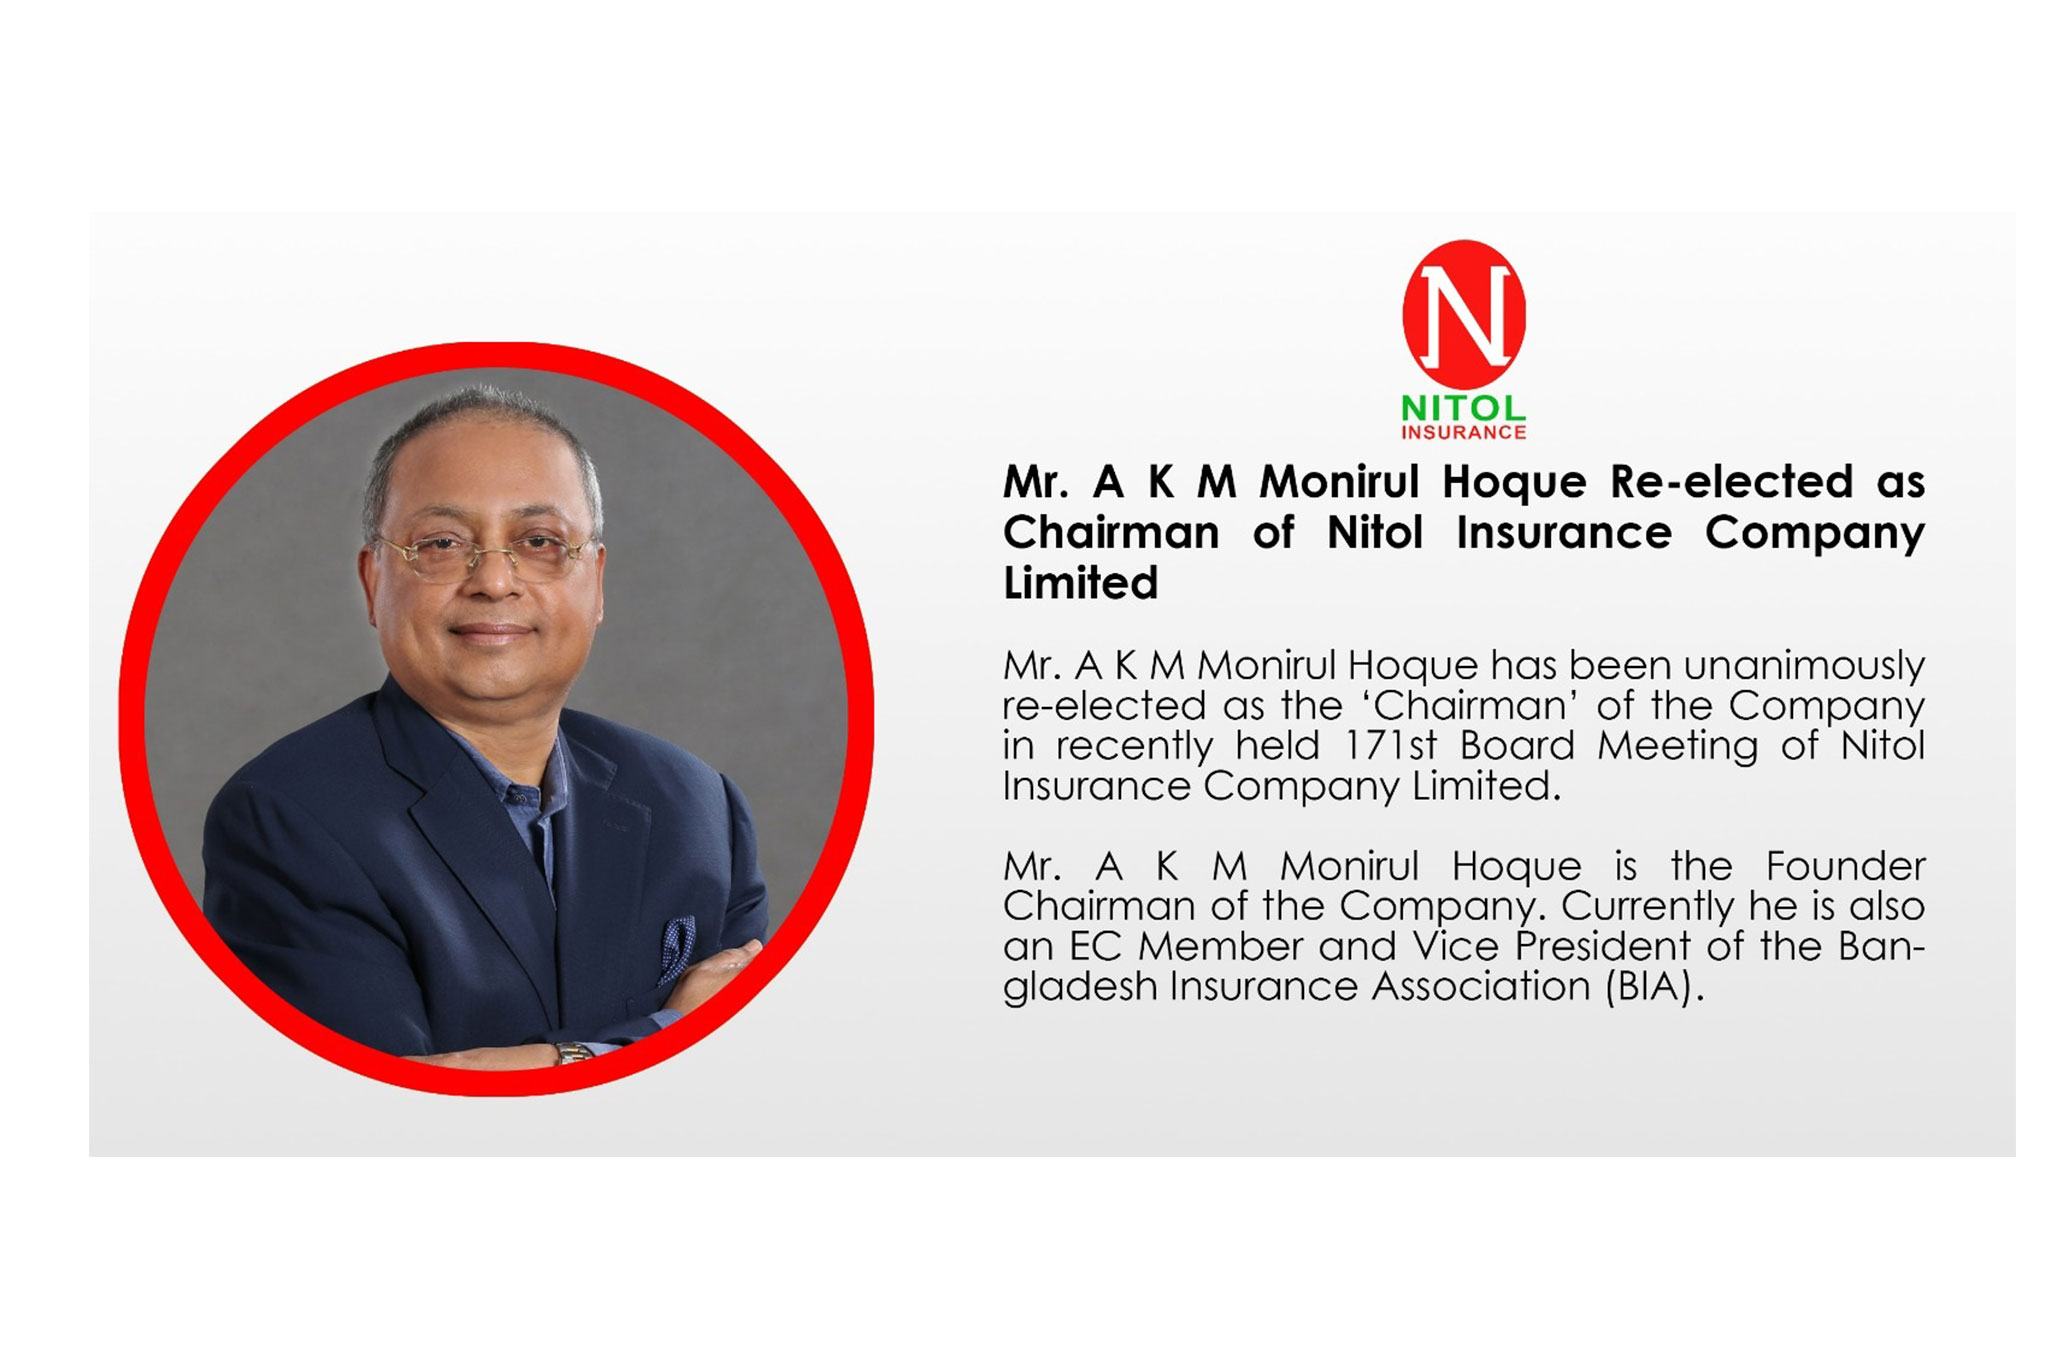 Mr. A K M Monirul Hoque Re-elected as Chairman of Nitol Insurance Company Limited